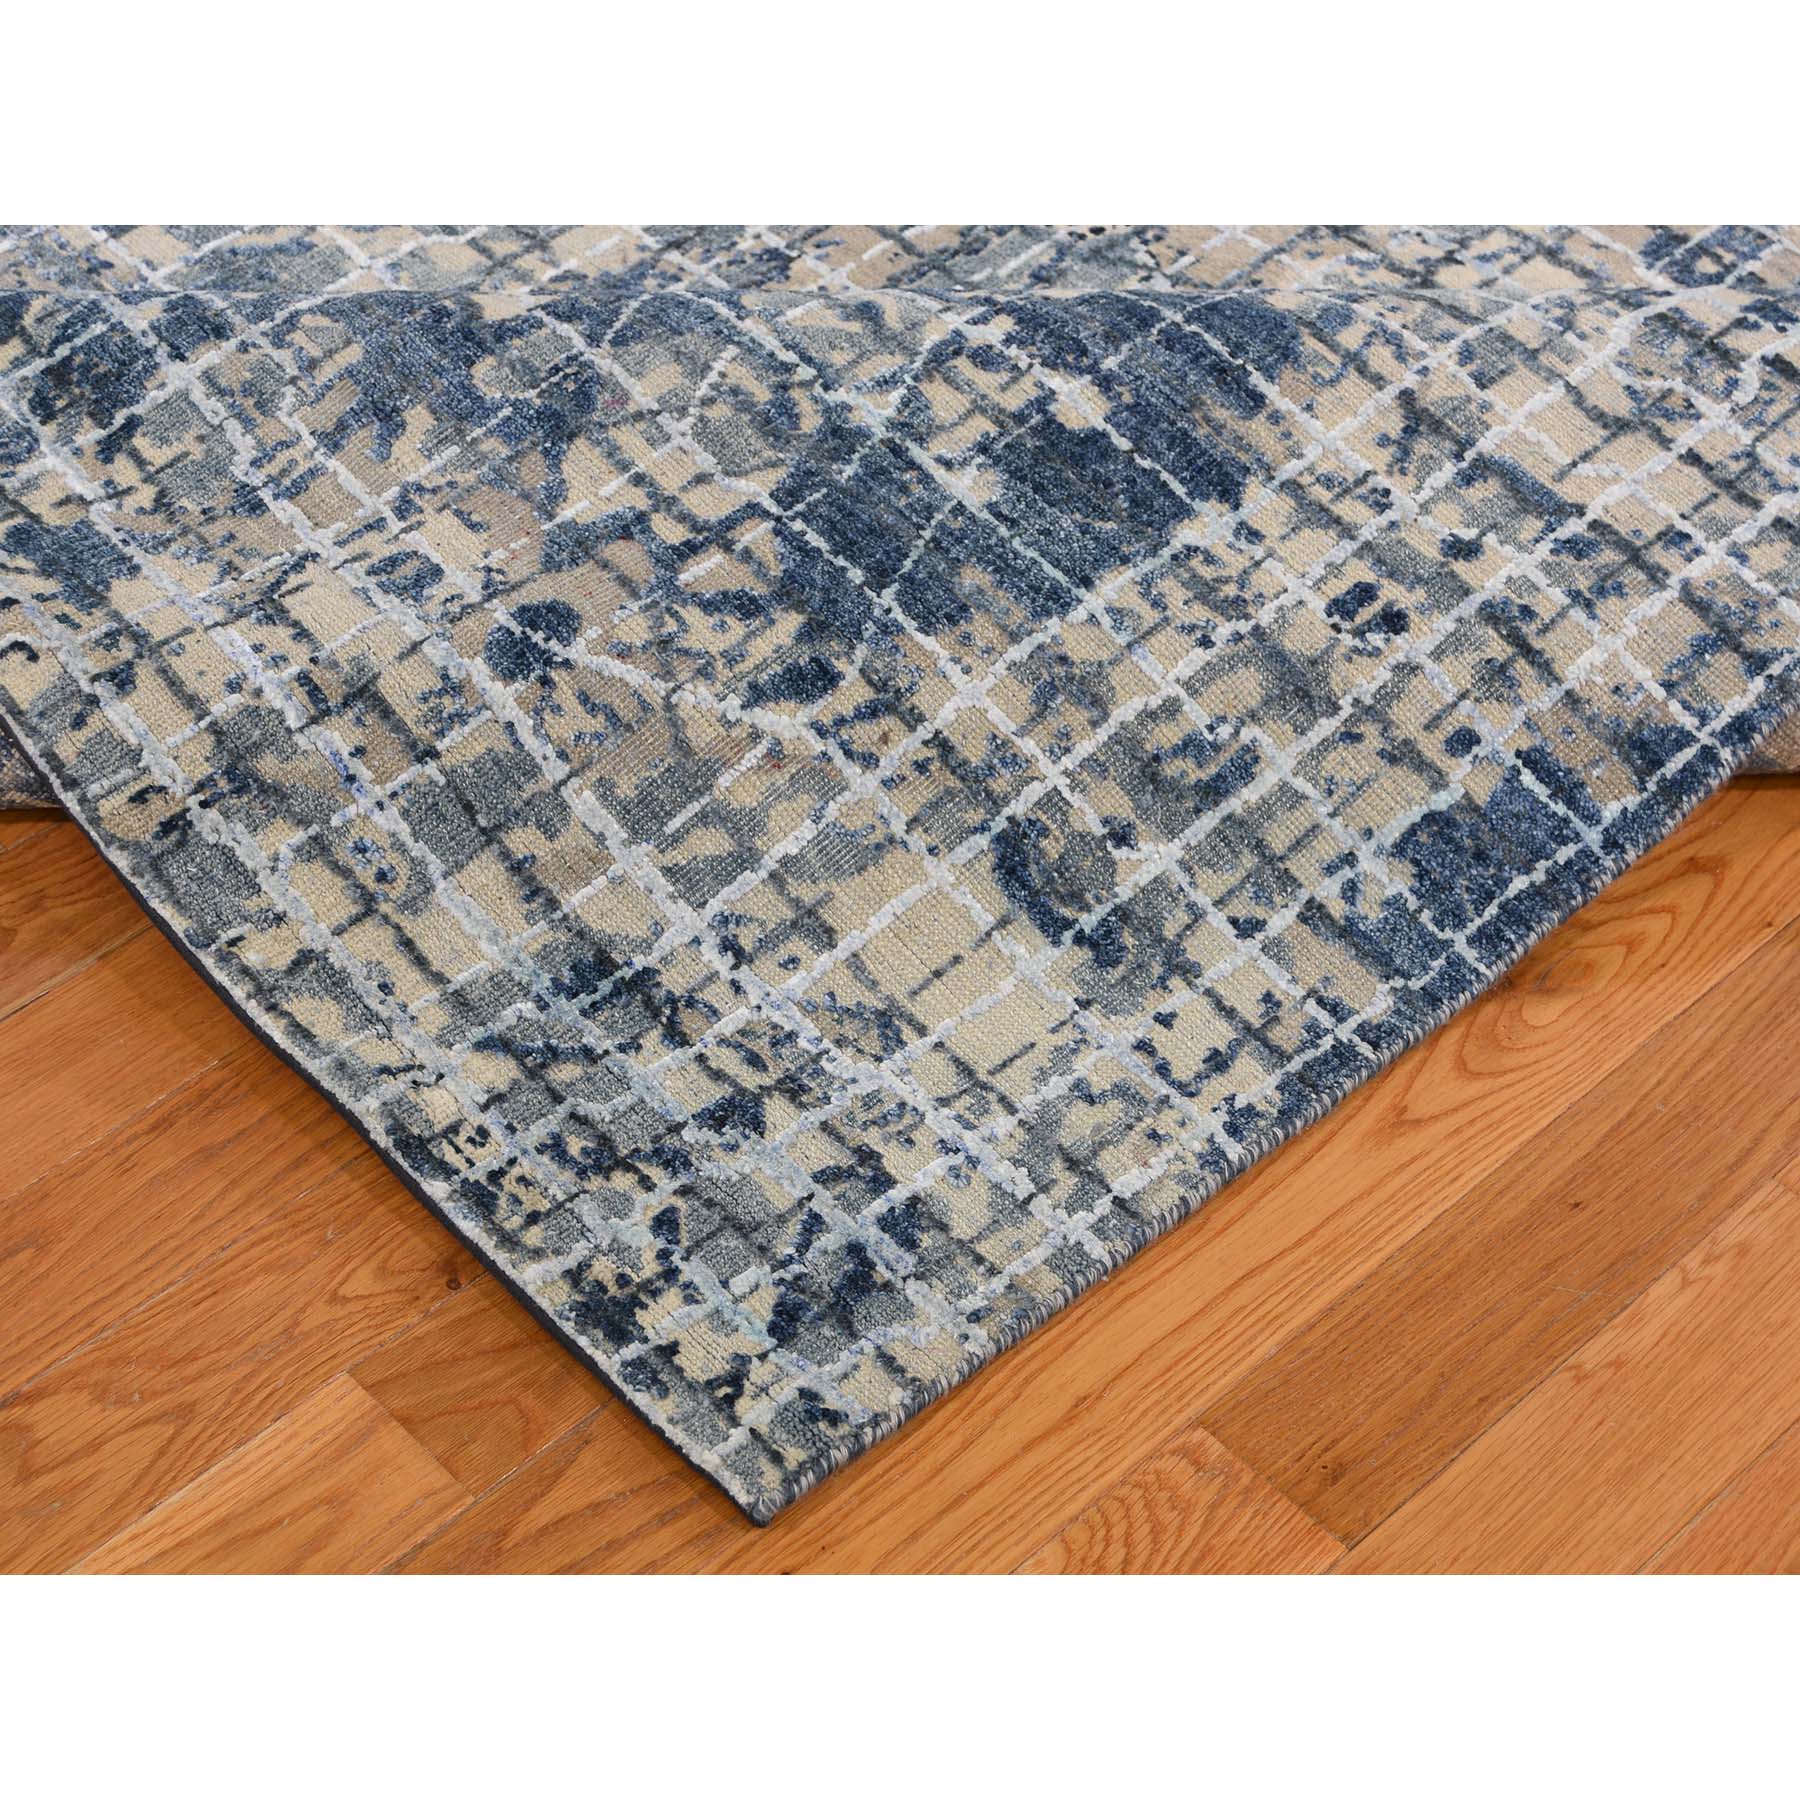 9'1"x12'2" THE GRAPH DESIGN Silk With Textured Wool Hand Woven Oriental Rug 